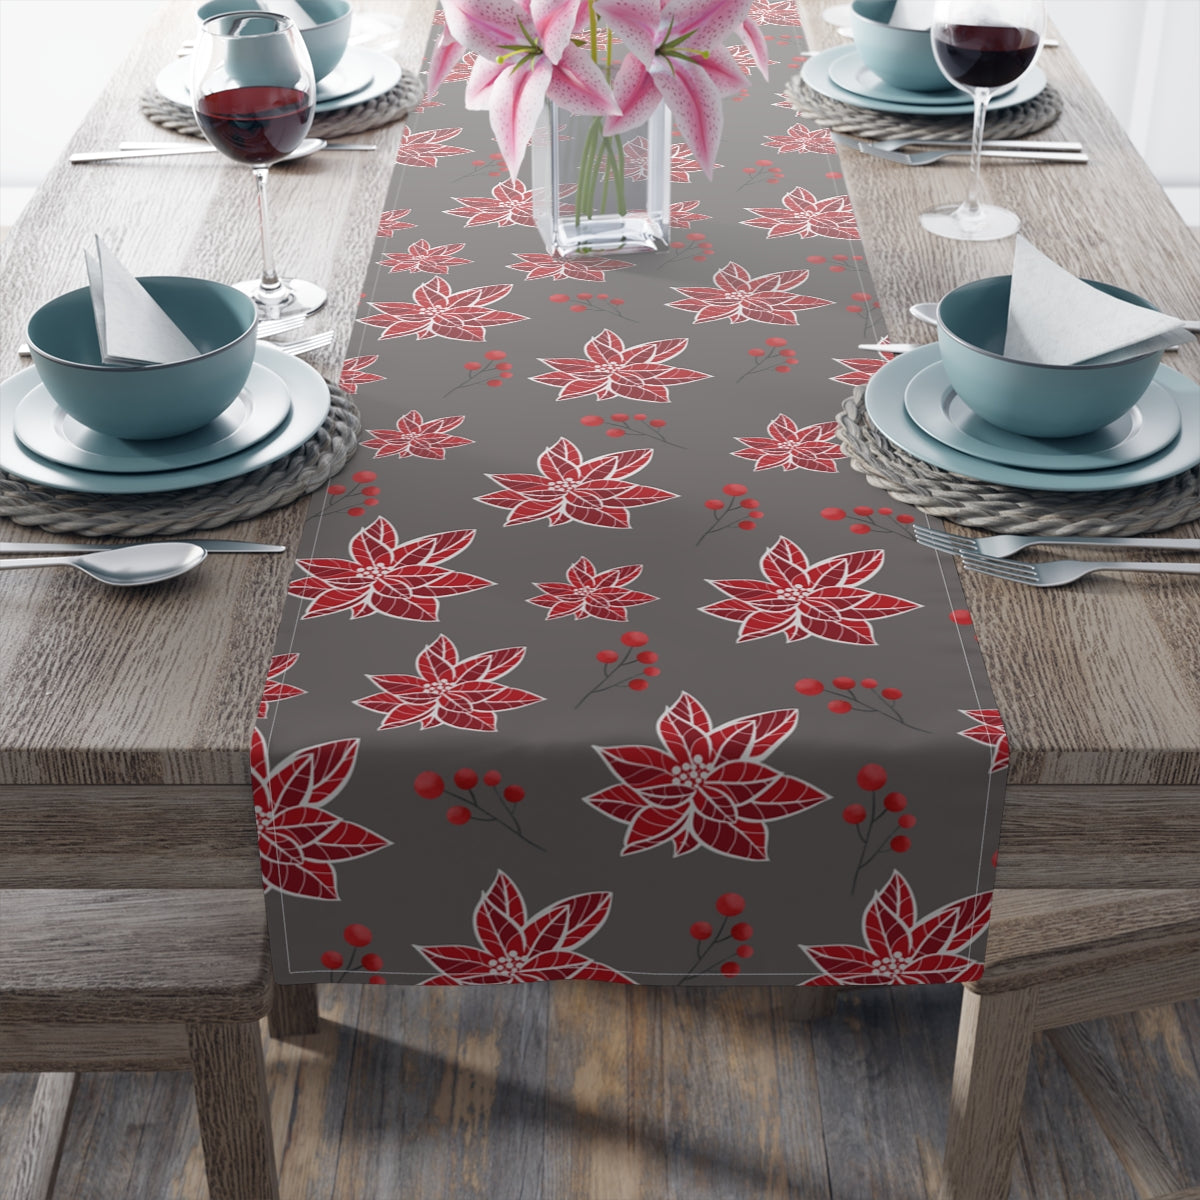 christmas table runner with poinsettia pattern